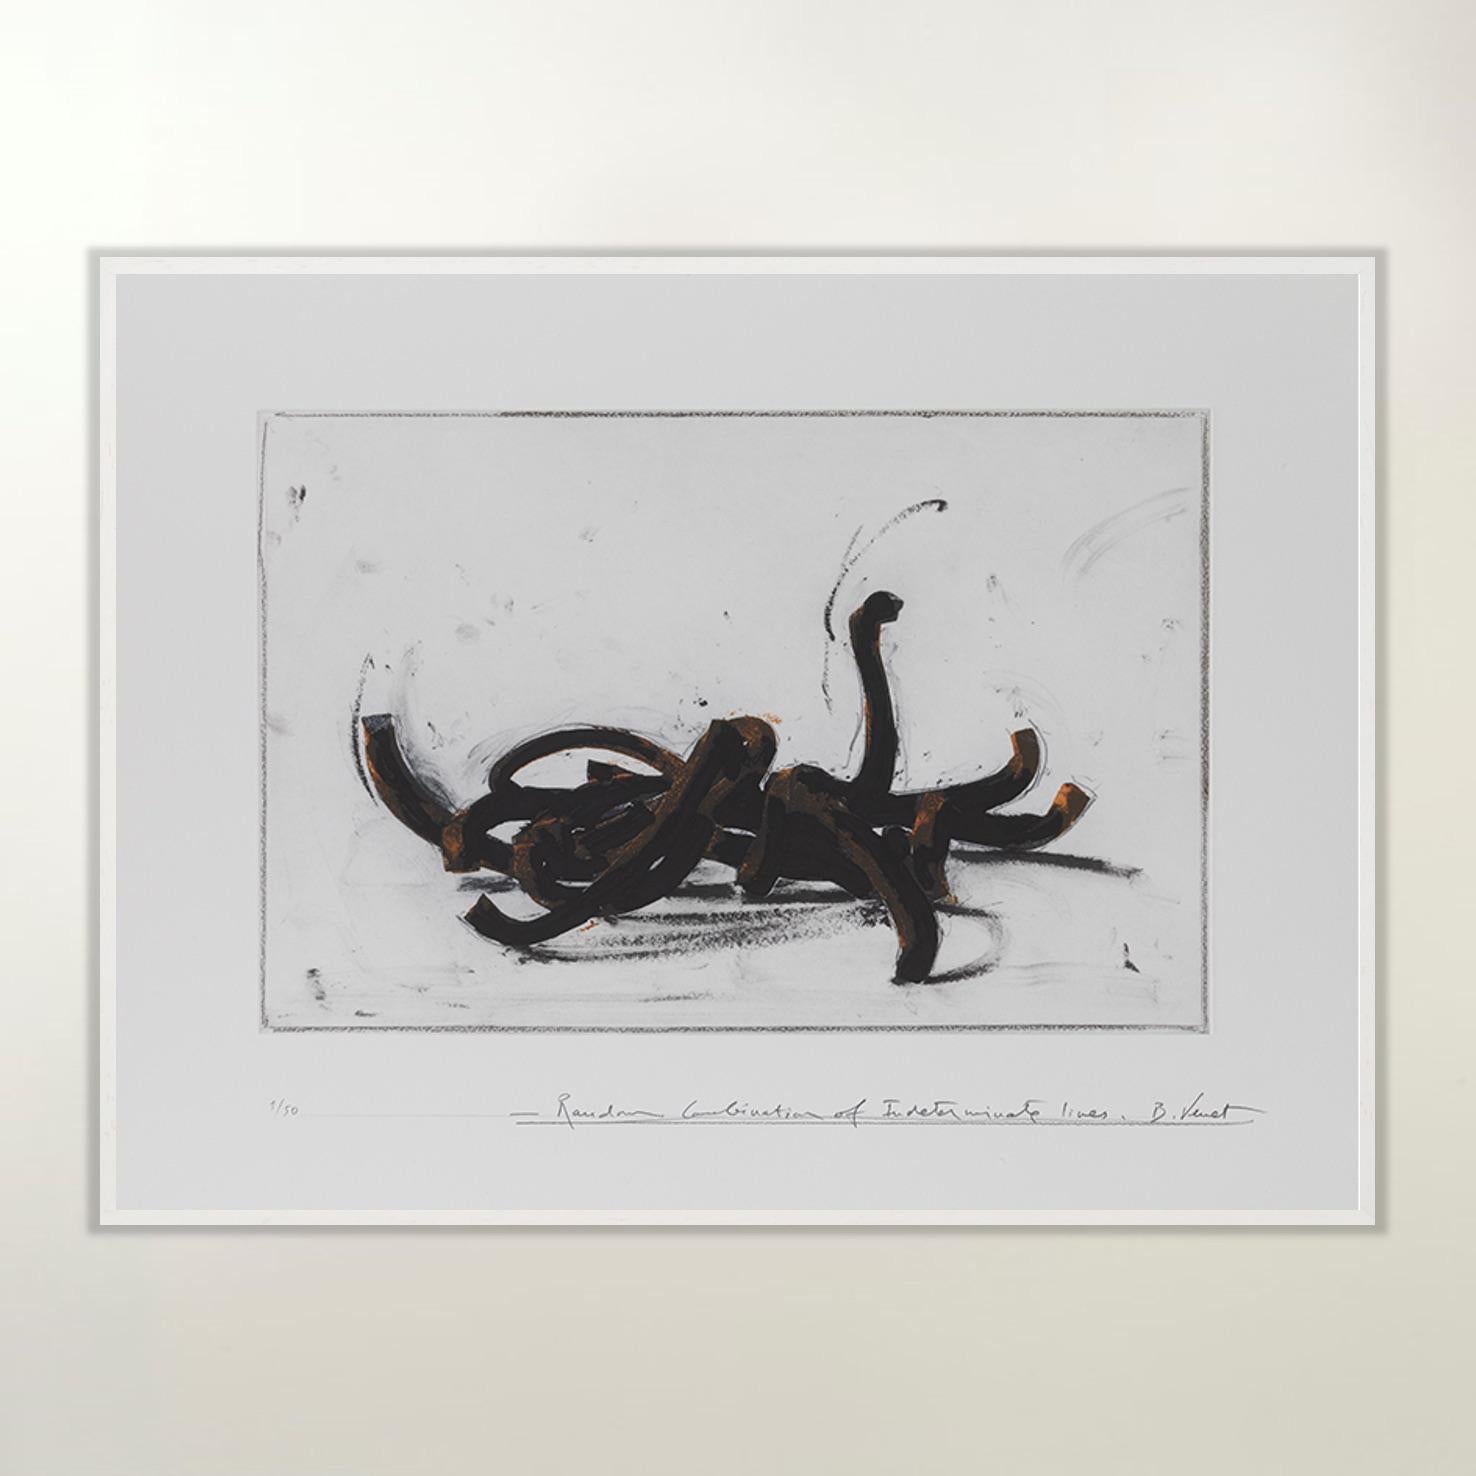 Bernar Venet, Random Combination of Indeterminate Lines
Contemporary, 21st Century, Etching
Etching (Portfolio of 6)
Edition of 50
68.5 x 91 cm (27 x 35.7 in)
Each is signed and numbered, accompanied by Certificate of Authenticity
In mint condition,